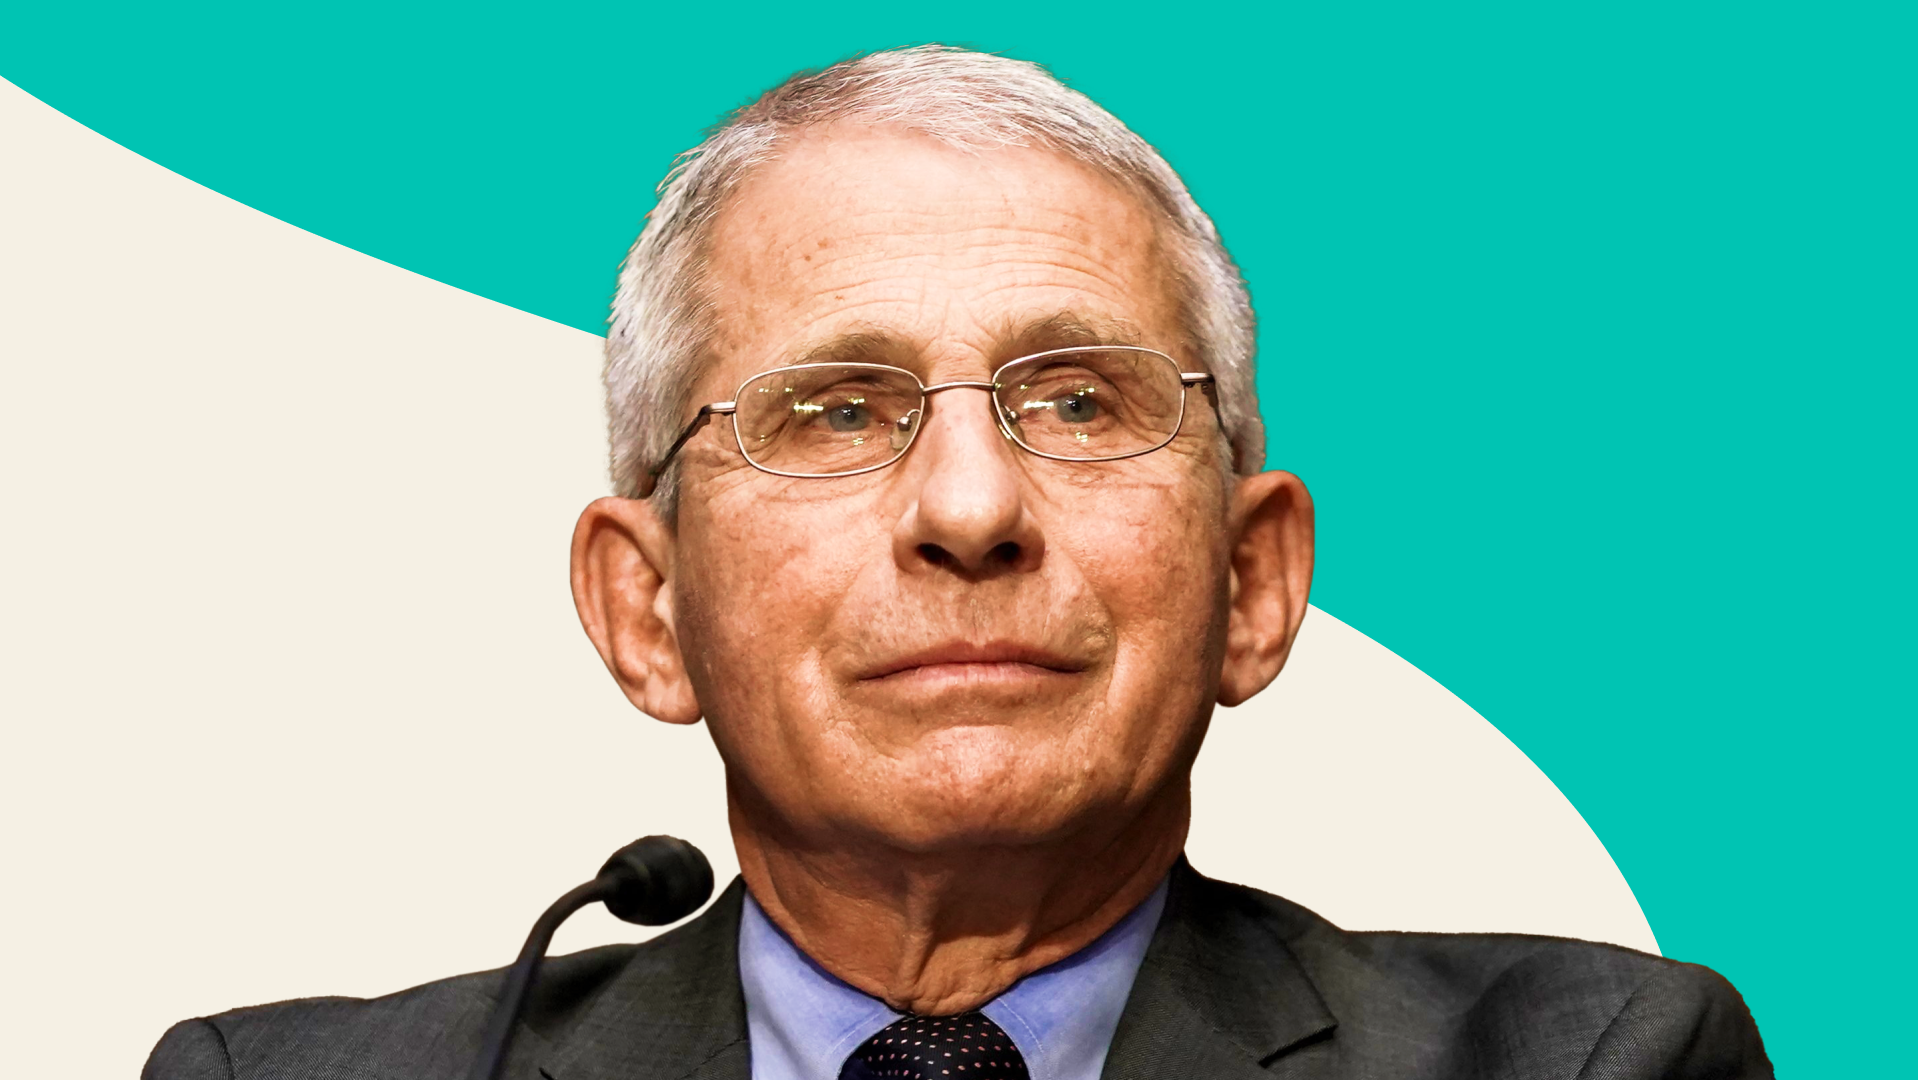 A photo of Dr. Fauci